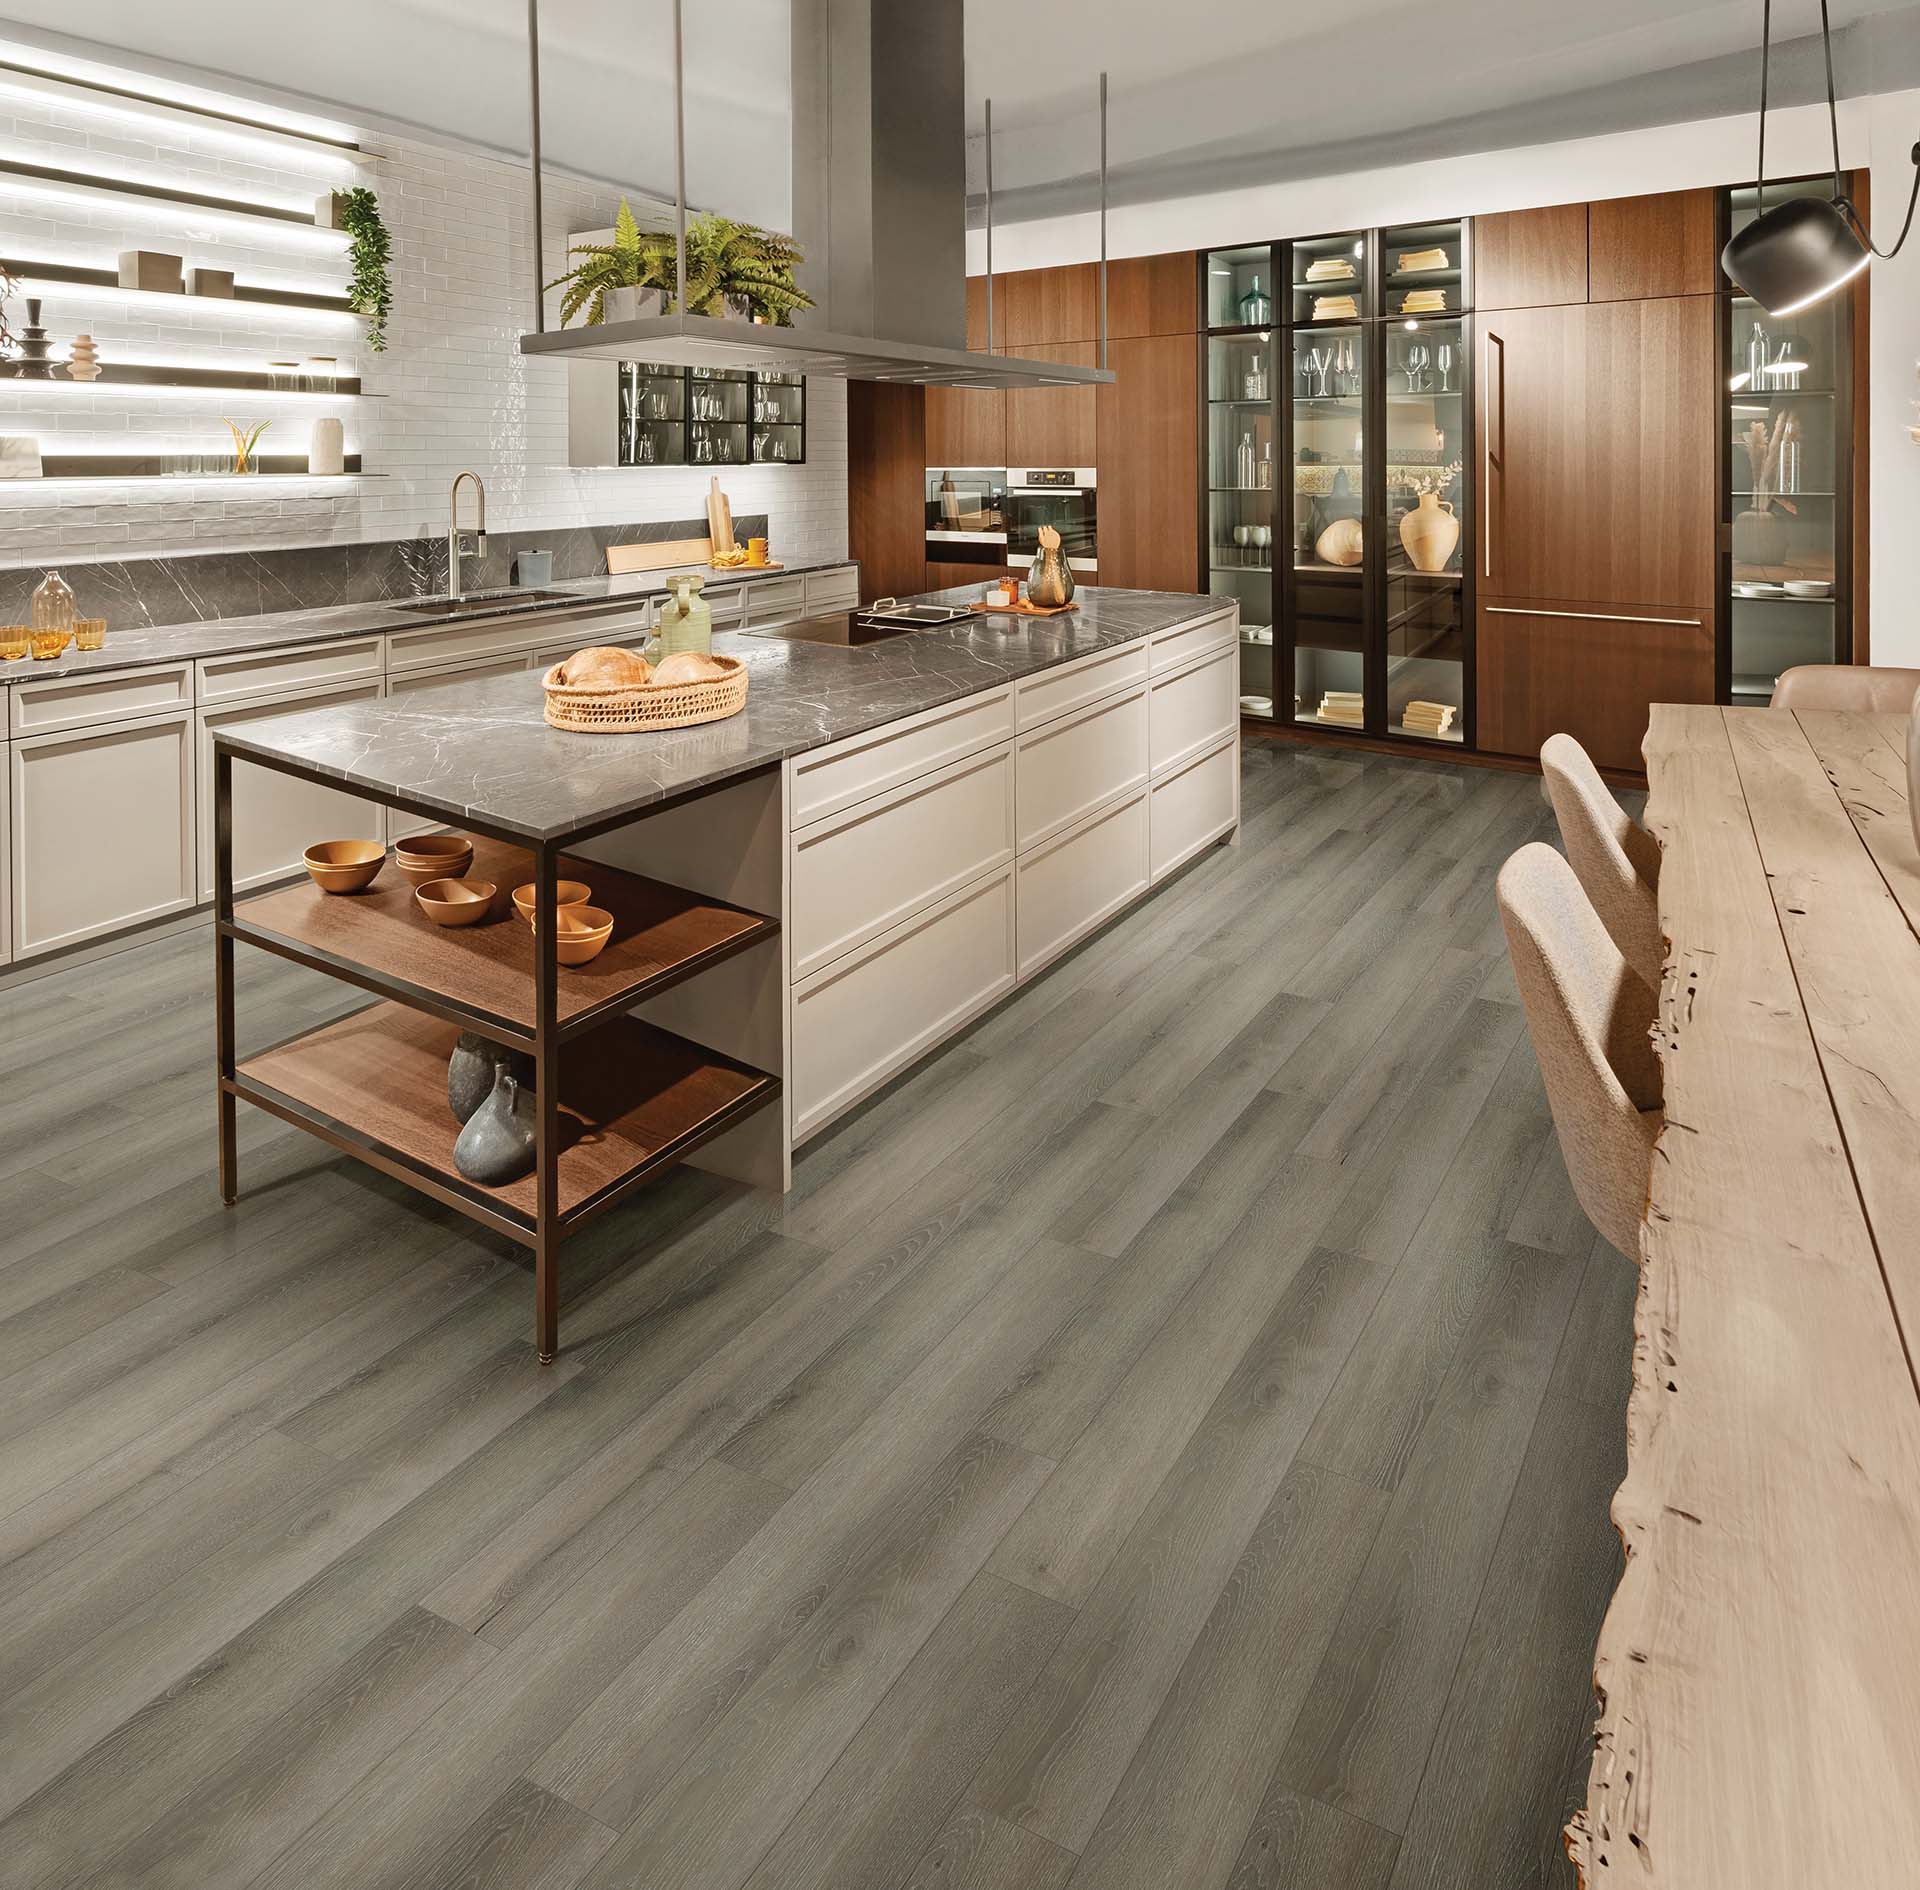 RigidCORE HD vinyl plank flooring in Brushed Gray in a kitchen.